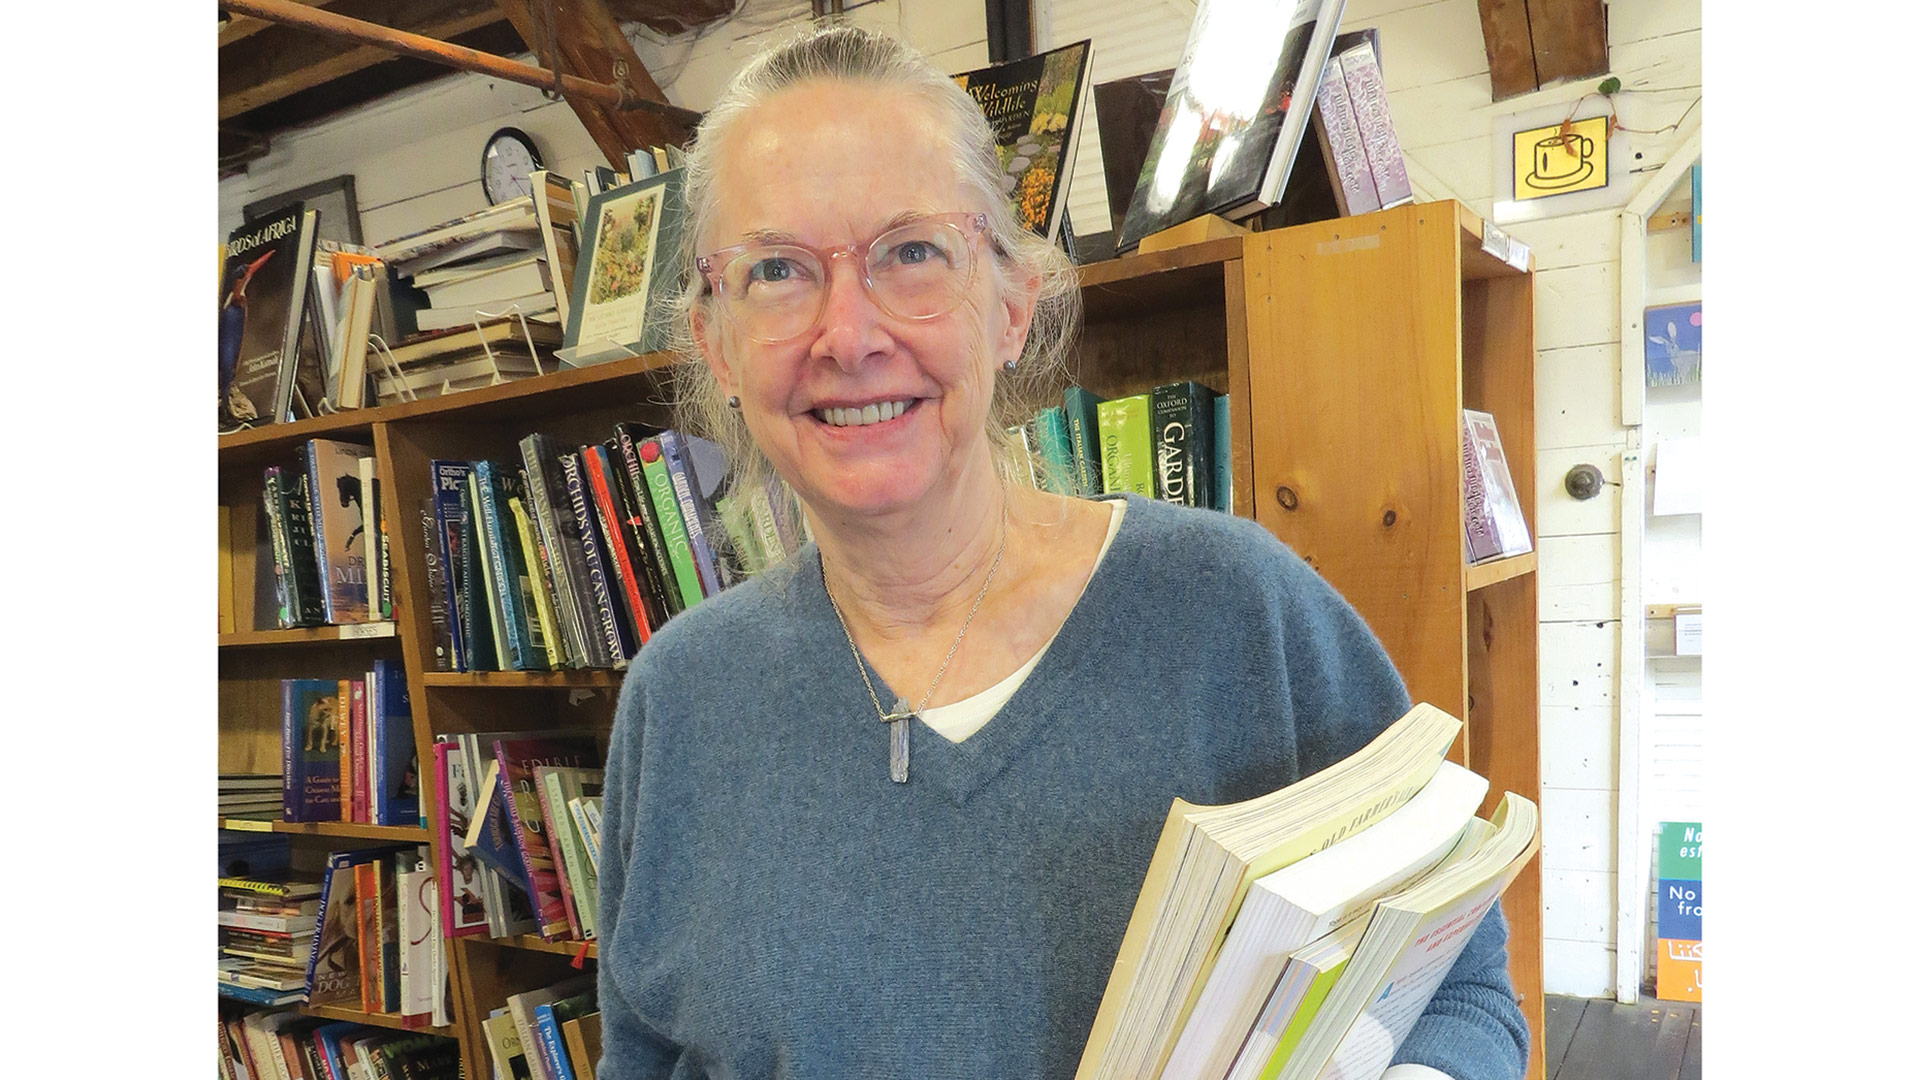 Susan Shilliday, owner of the Bookmill in Montague